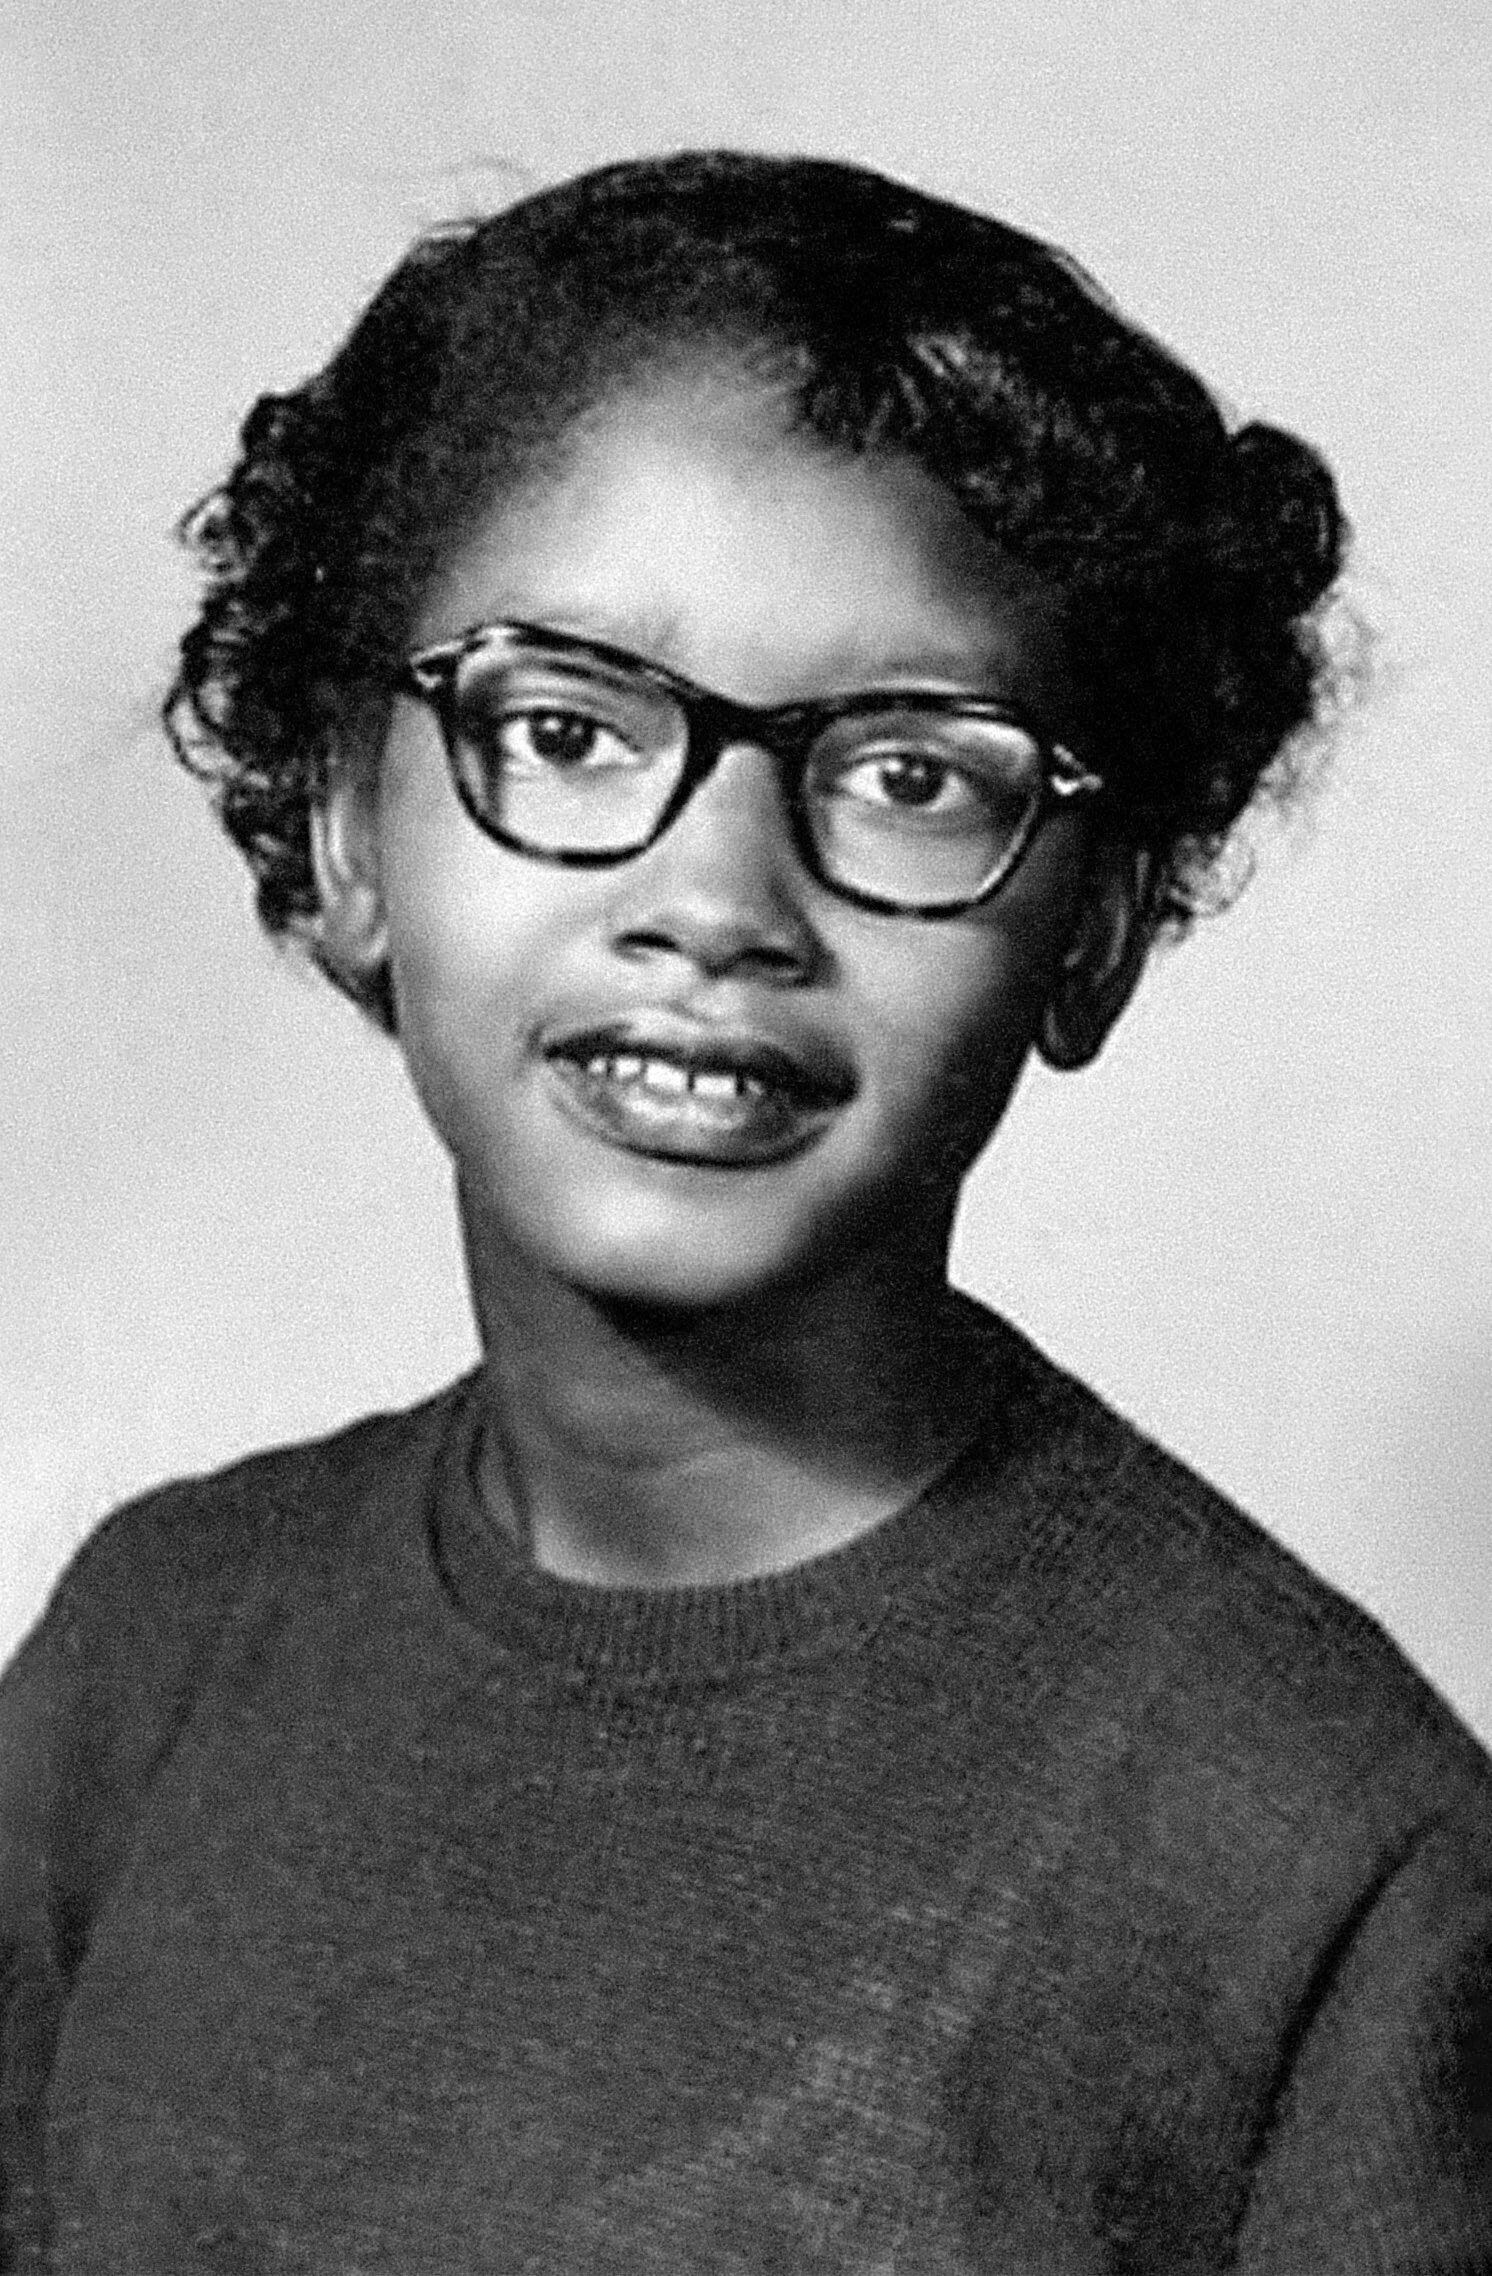 A school portrait of a young Black girl